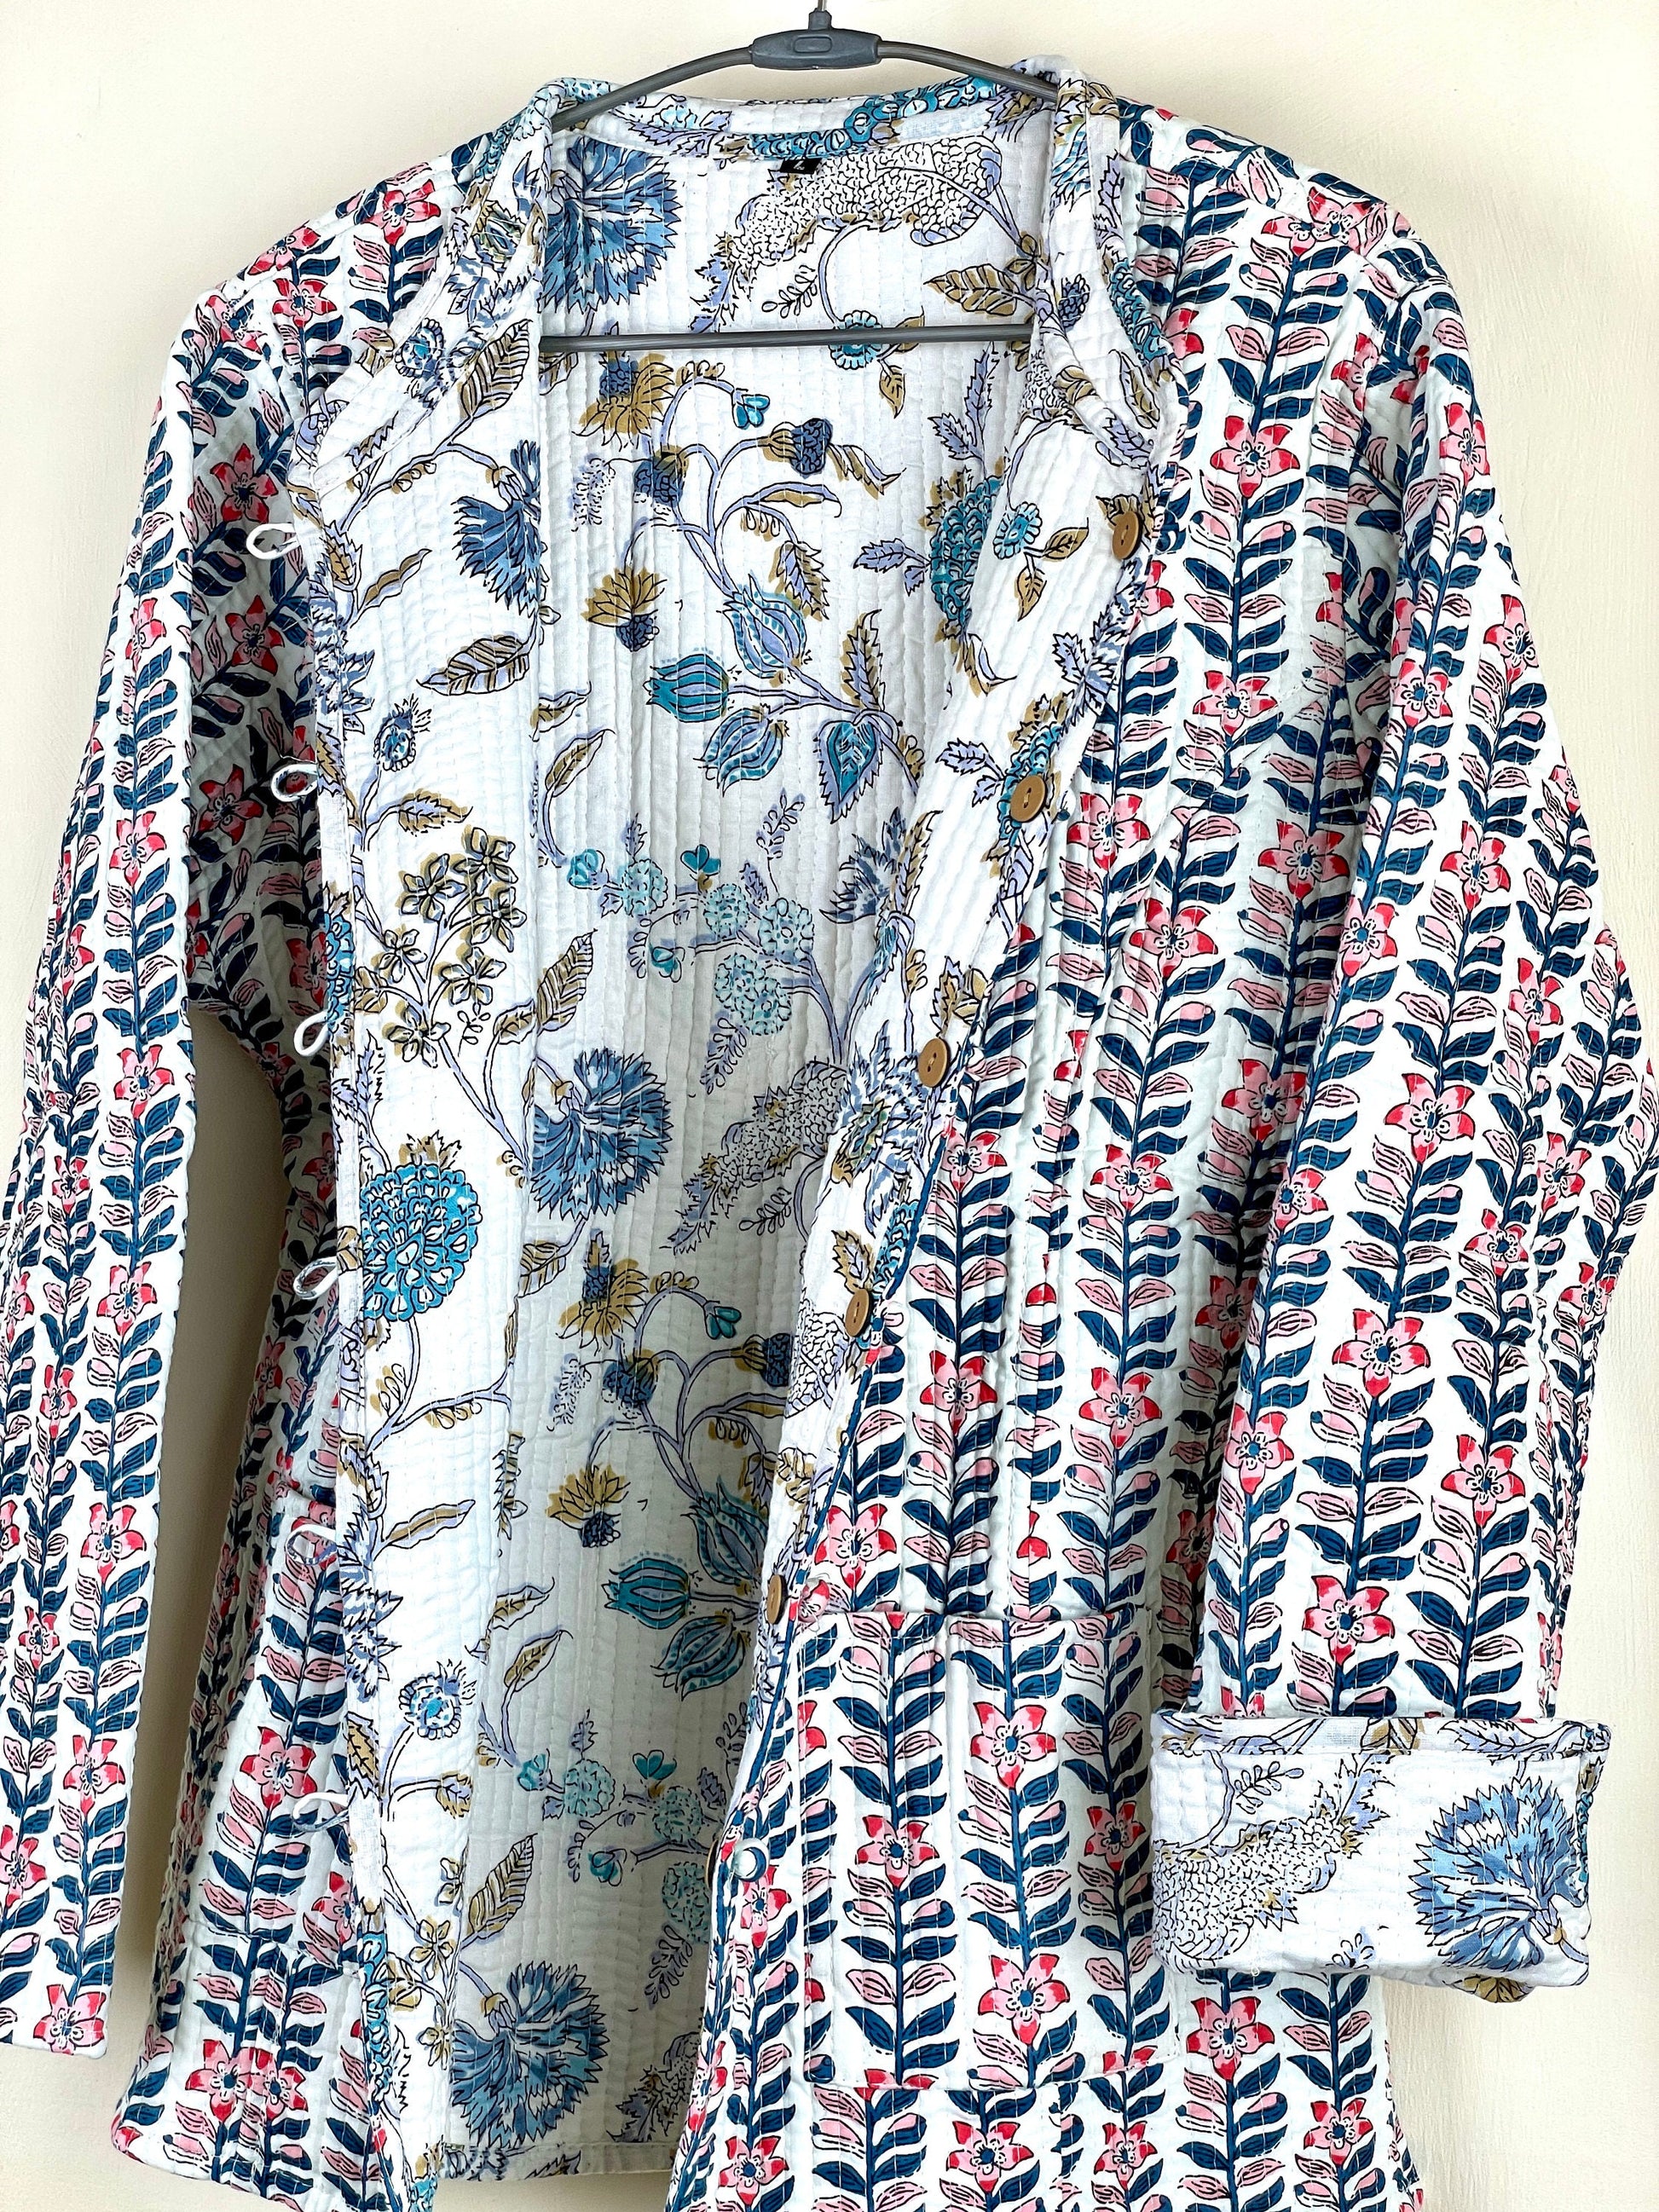 Indian Handmade Quilted Cotton Fabric Jacket Stylish White, Blue & Pink Floral Women's Coat, Reversible Waistcoat, Christmas Gift for Her